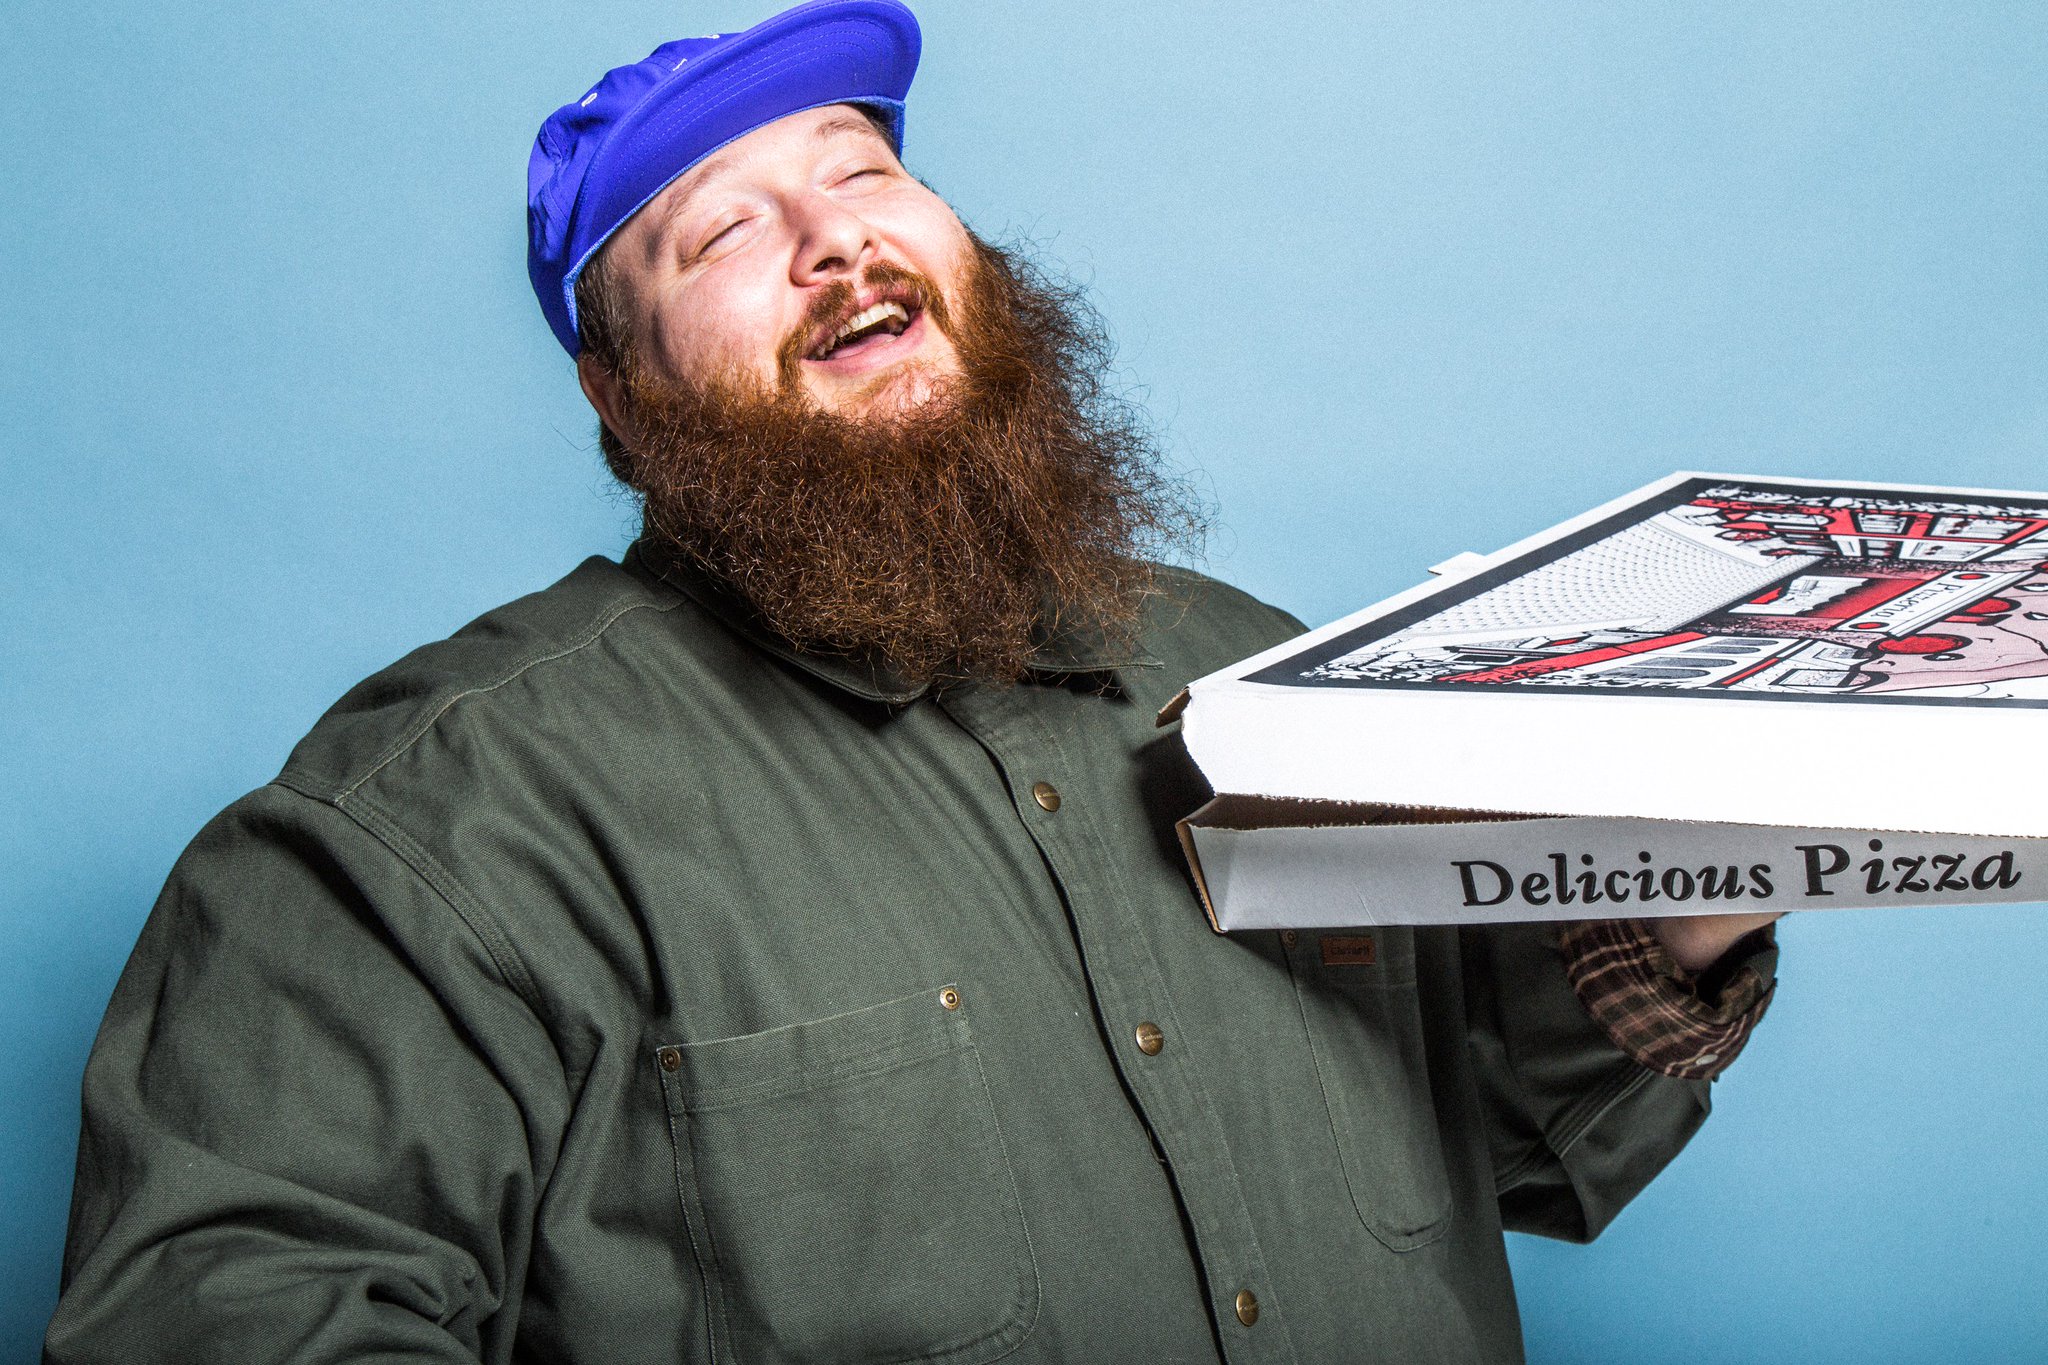 Today is the birthday of Action Bronson.
Happy Birthday 